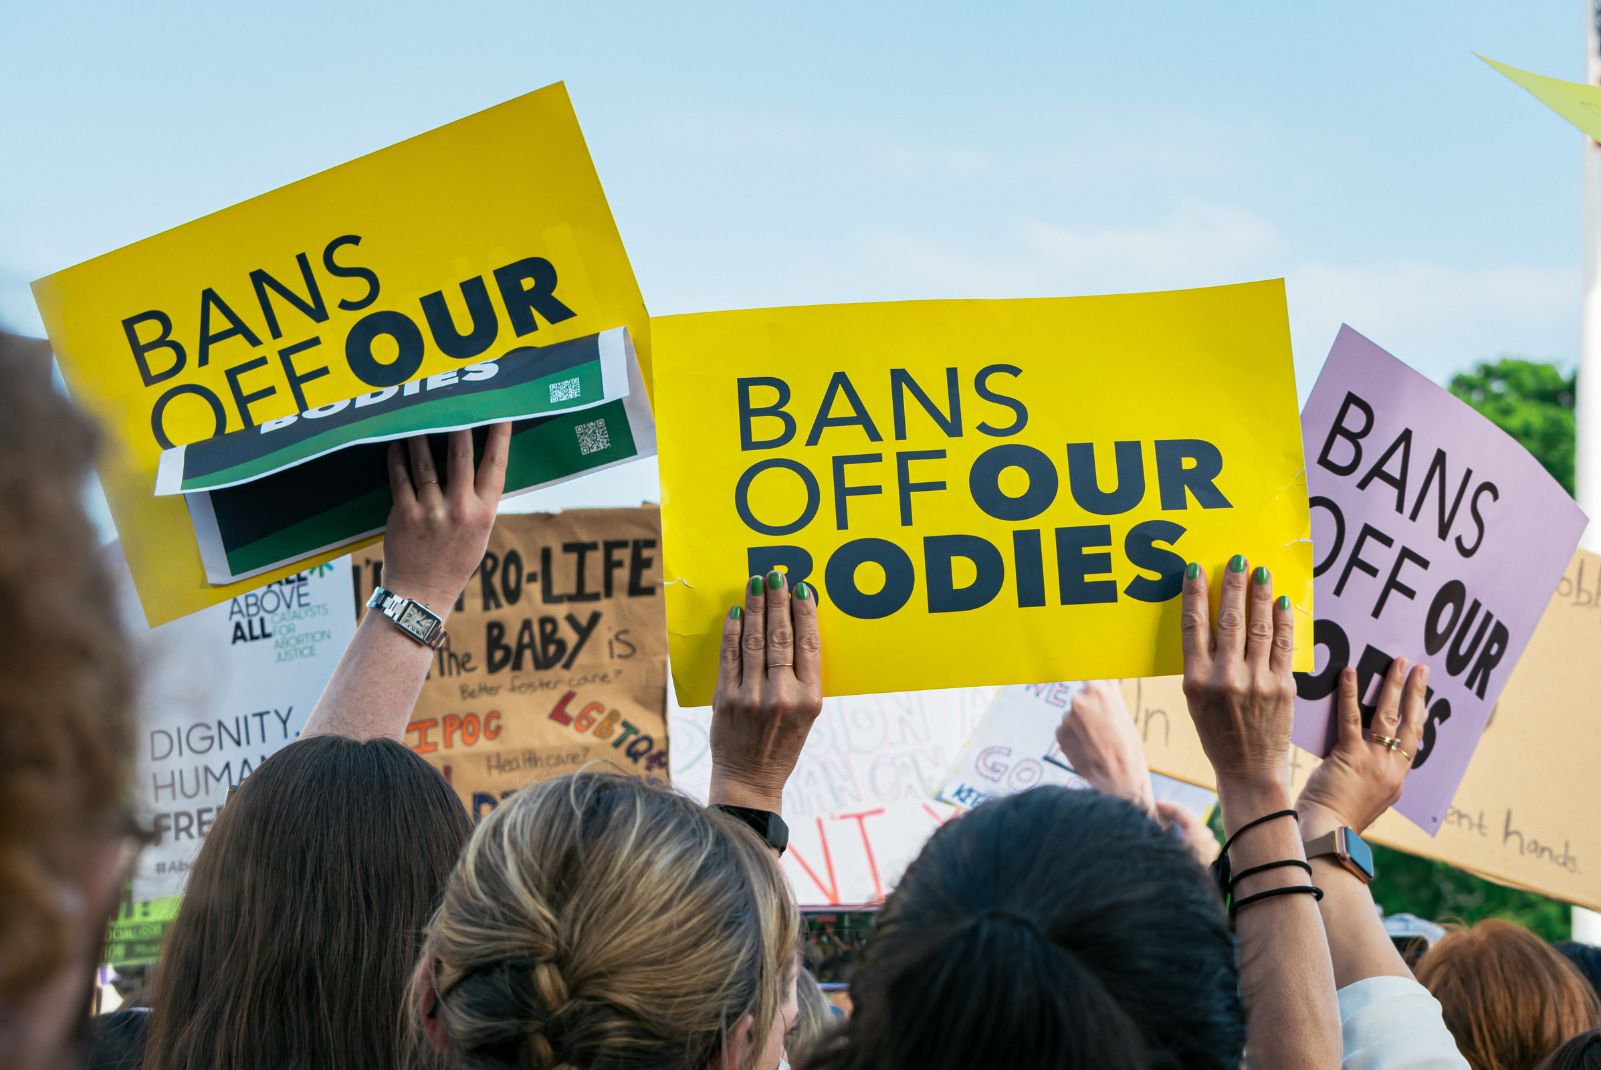 Protest sign reads "bans off our bodies"